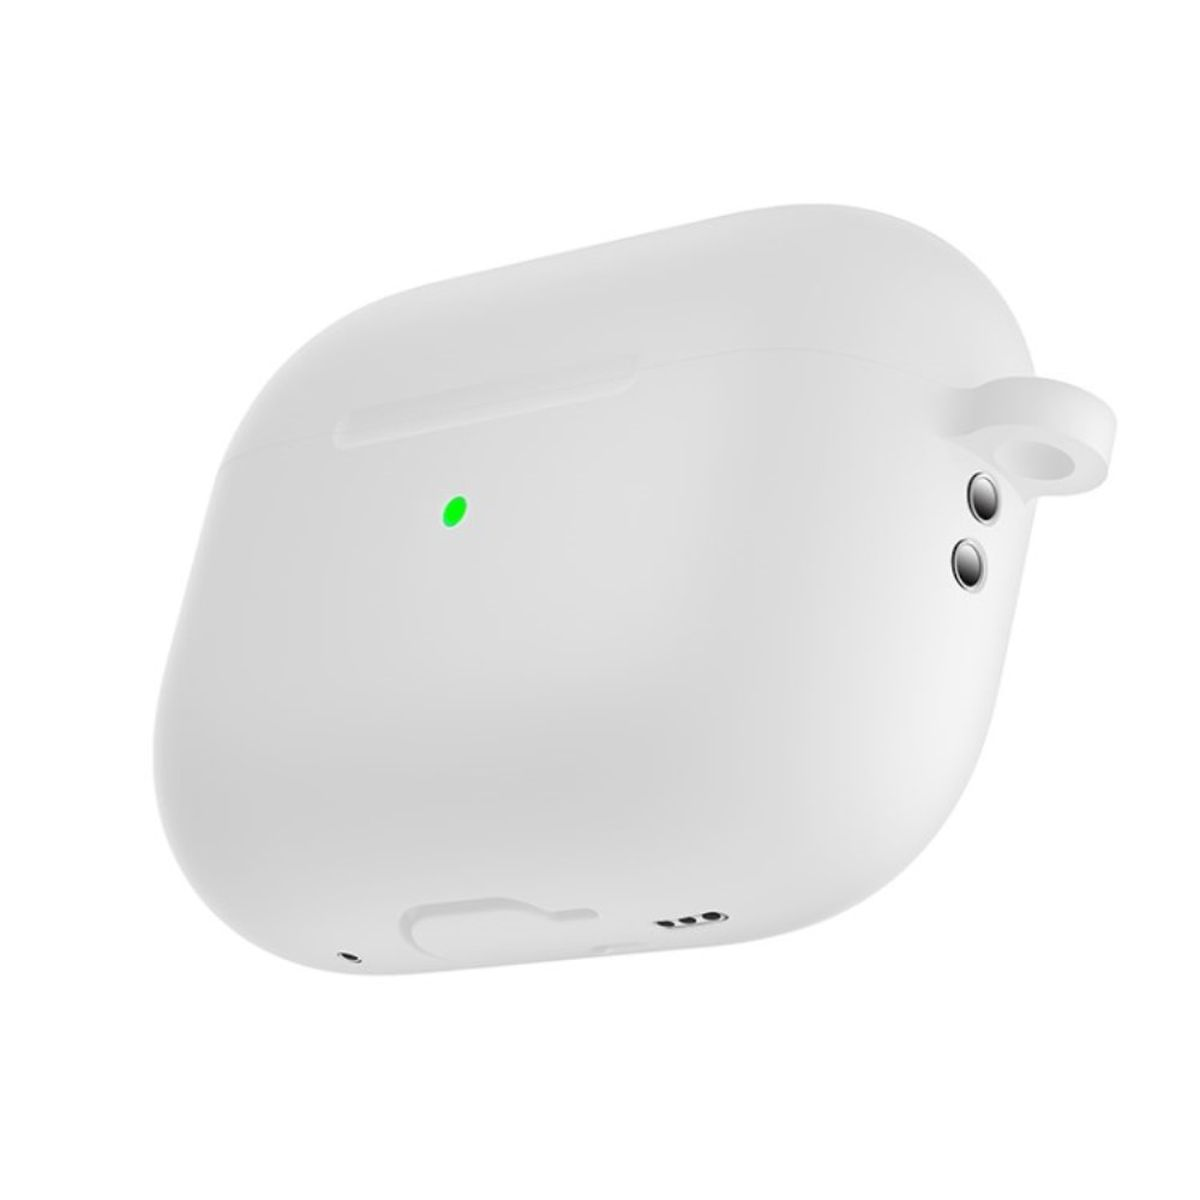 COVERKINGZ Silikoncover Ladecase für Apple Airpods 77379 2 Pro weiß